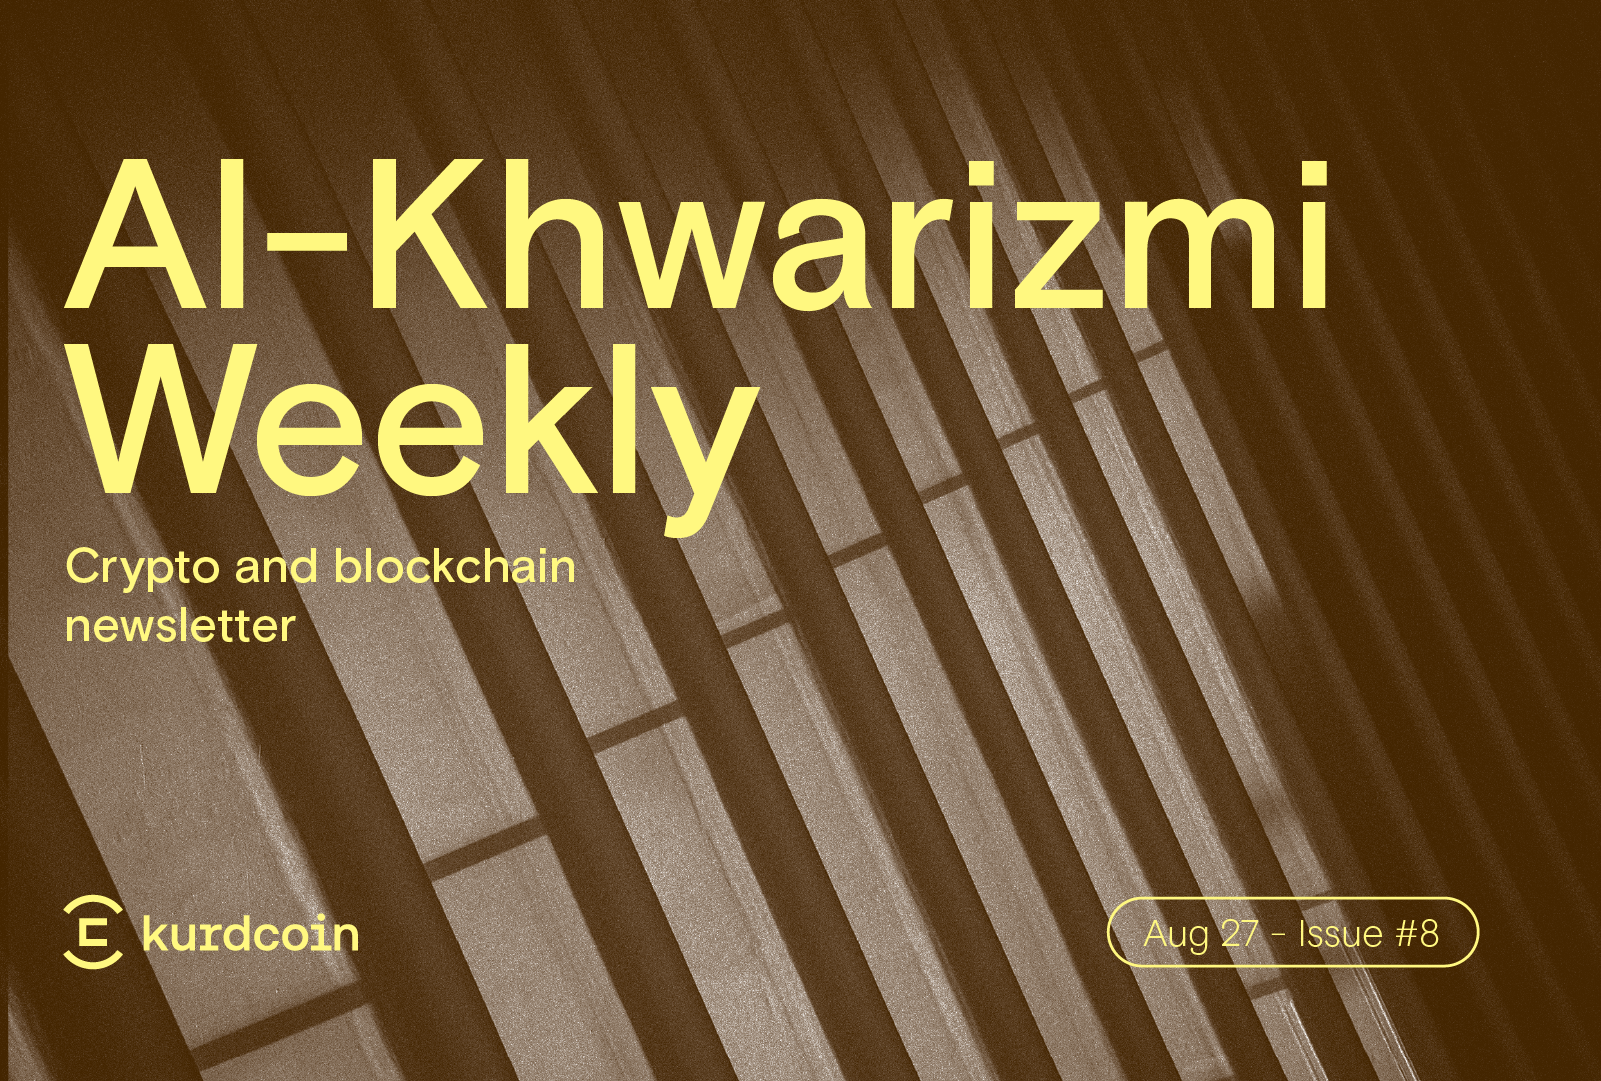 Cover of Kurdcoin's weekly crypto and blockchain newsletter